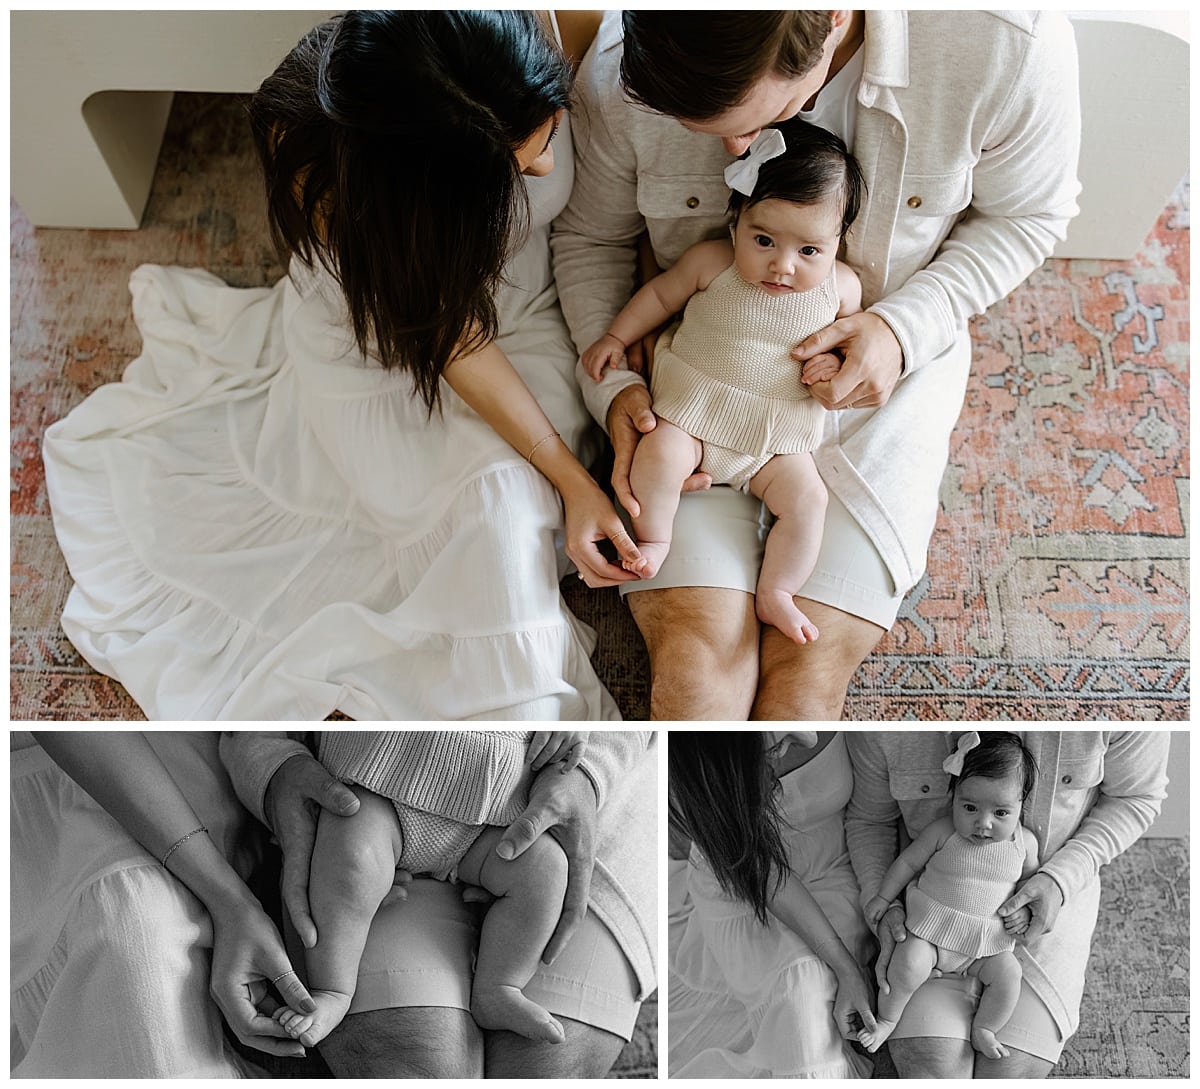 Parents sit on the floor with their baby understanding the importance of being able to Document Your Newborn